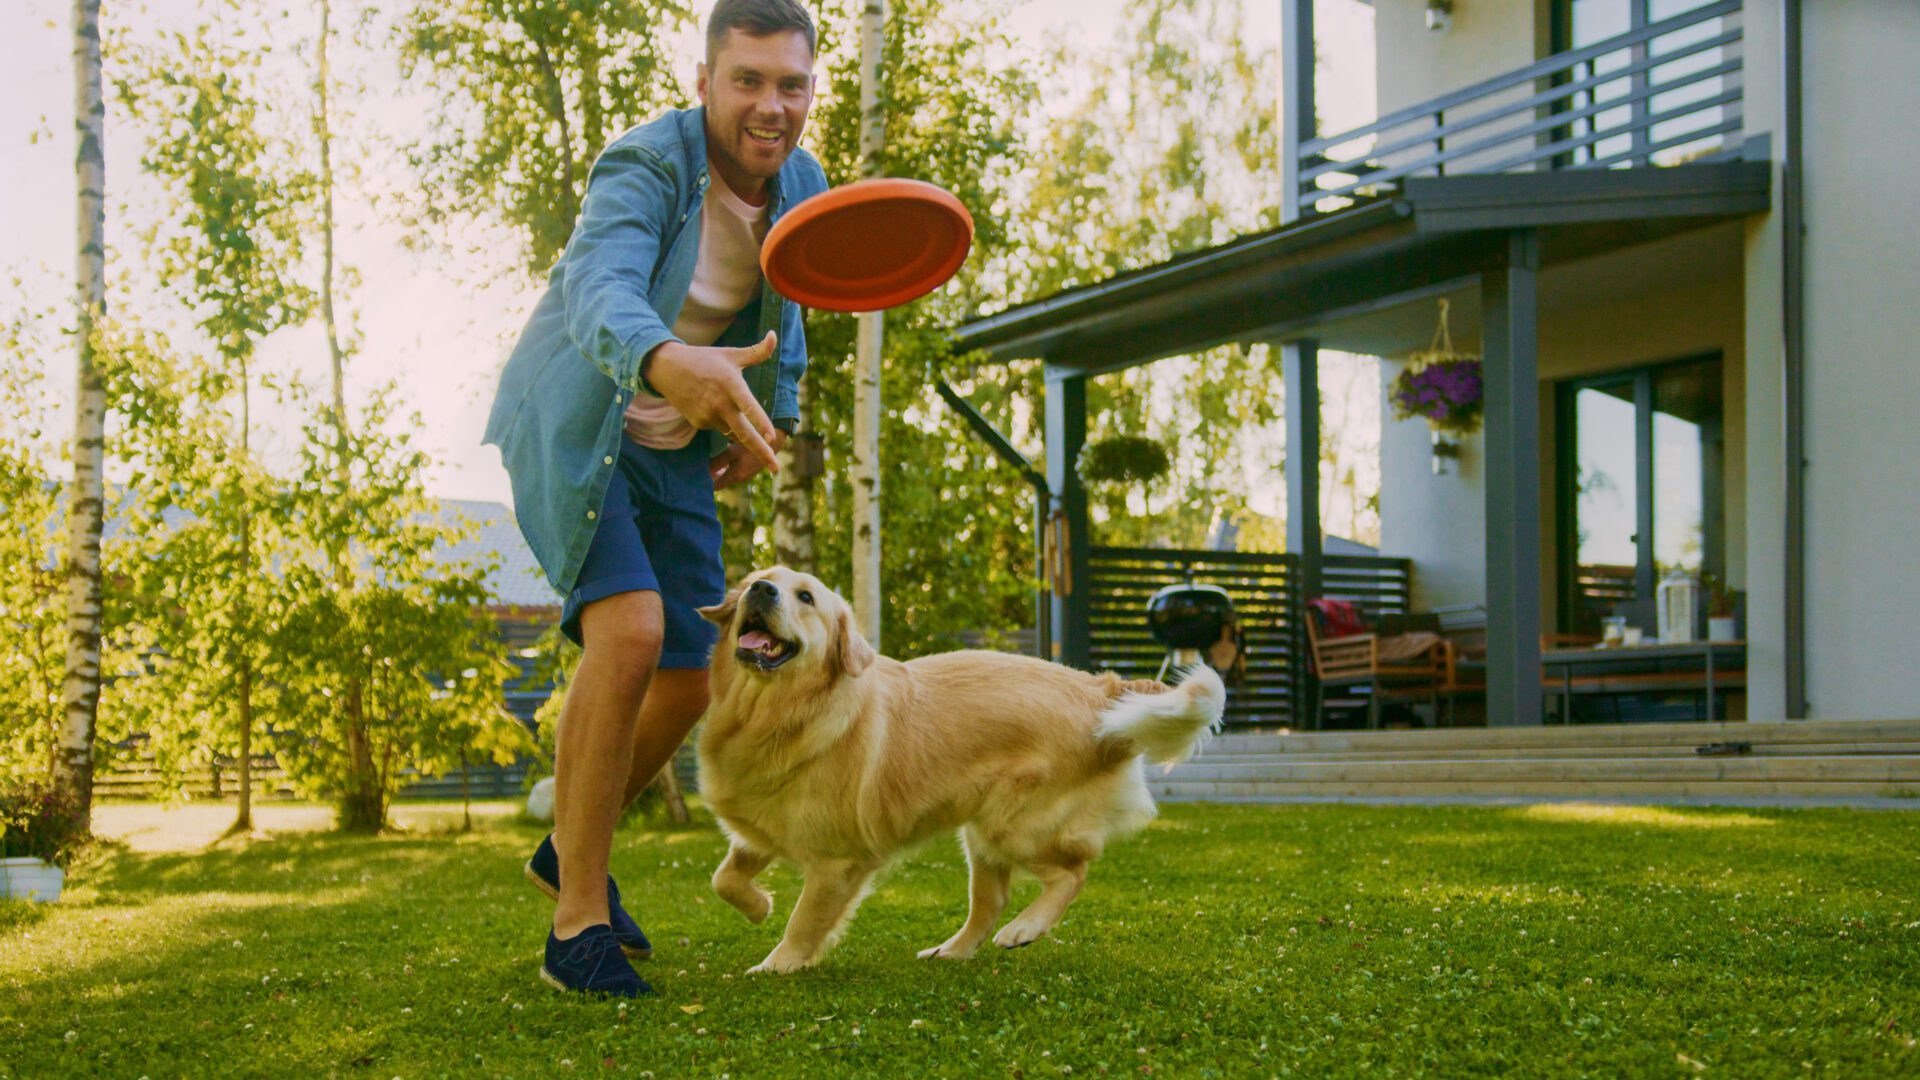 A man and his dog playing frisbee in the yard.